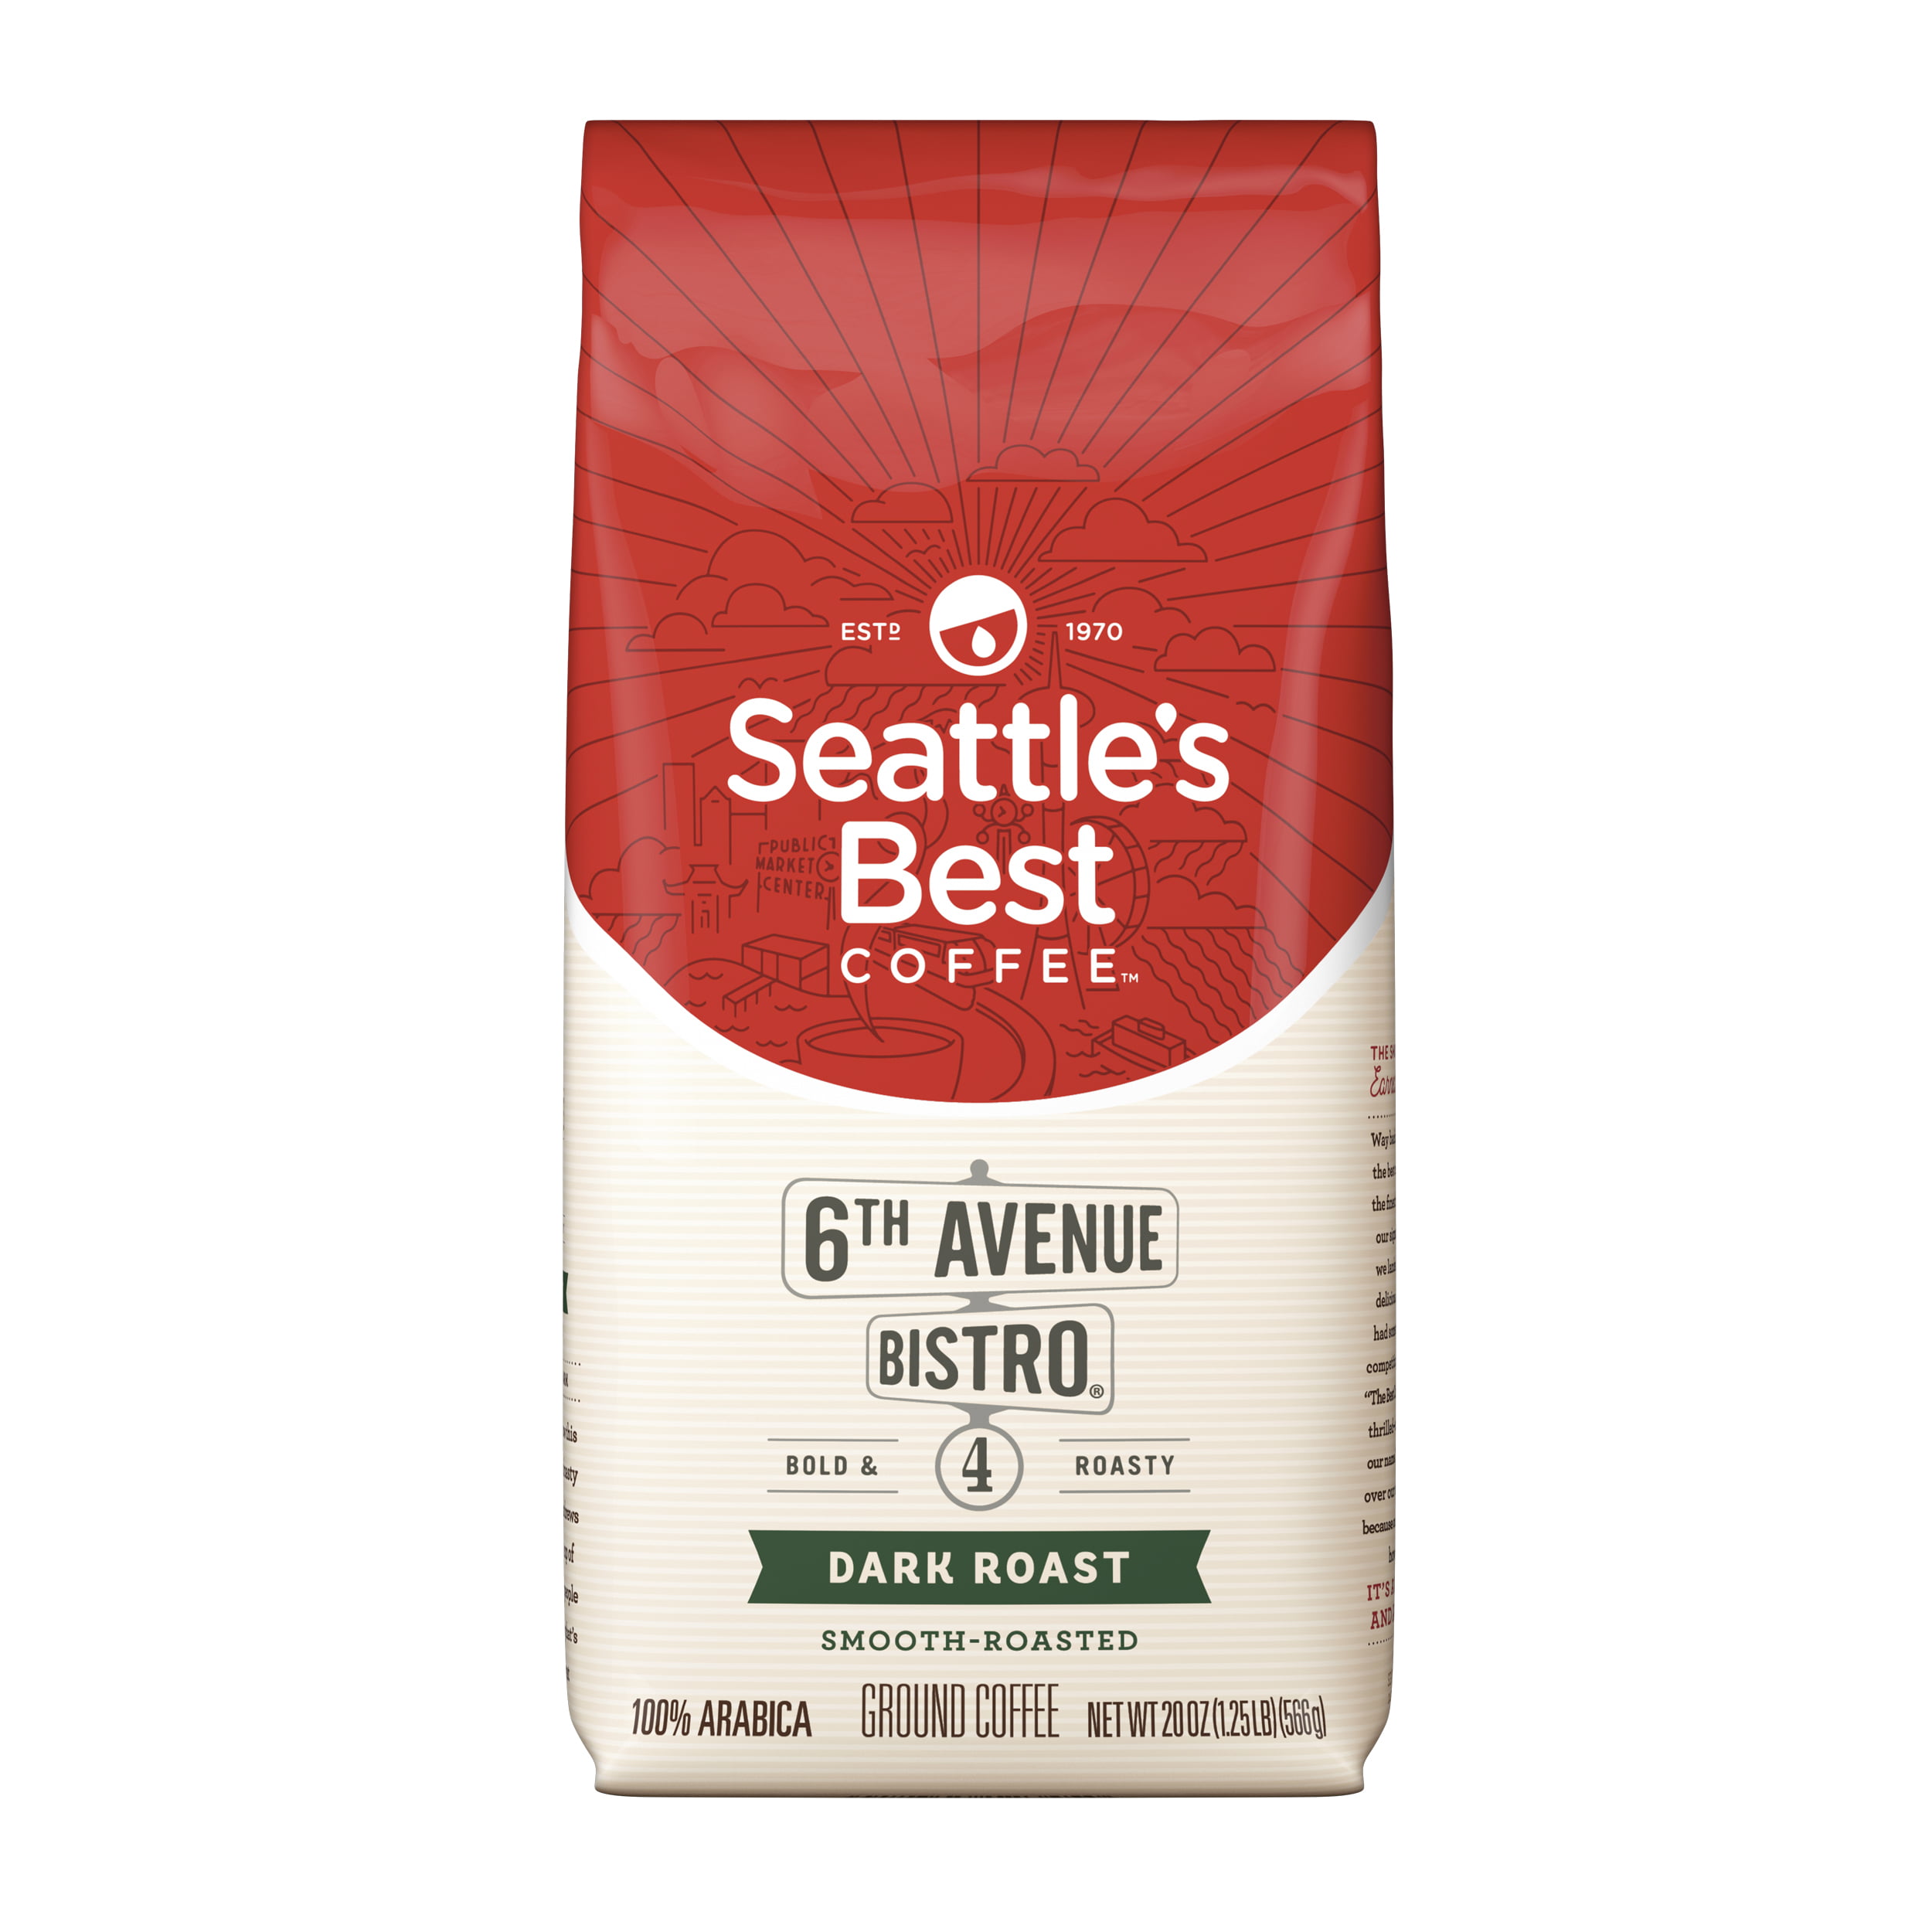 Seattles Best Coffee 6th Avenue Bistro (Previously